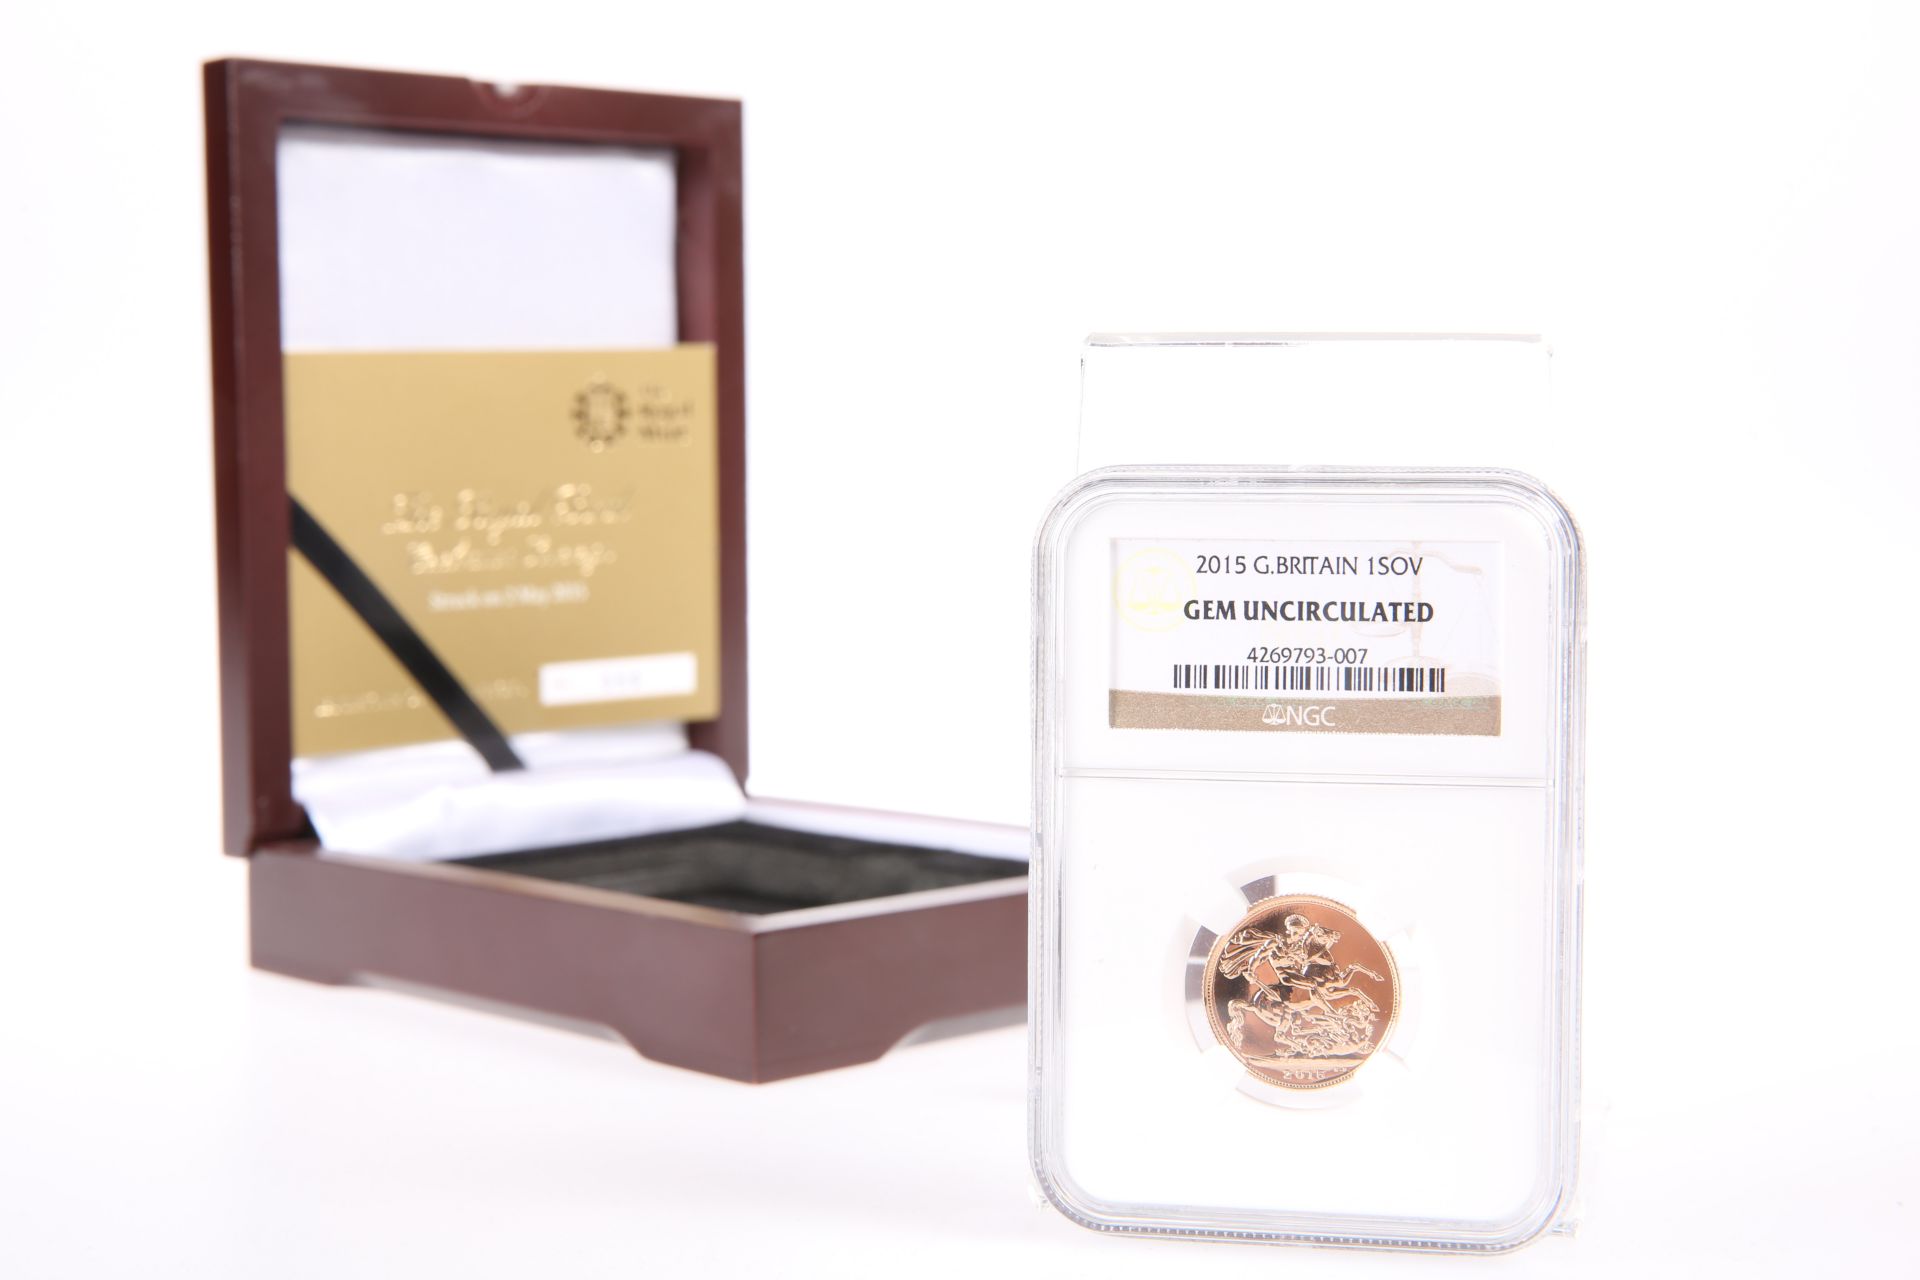 A ROYAL MINT LIMITED EDITION CELEBRATION UNCIRCULATED FULL SOVEREIGN, "THE ROYAL BIRTH", boxed